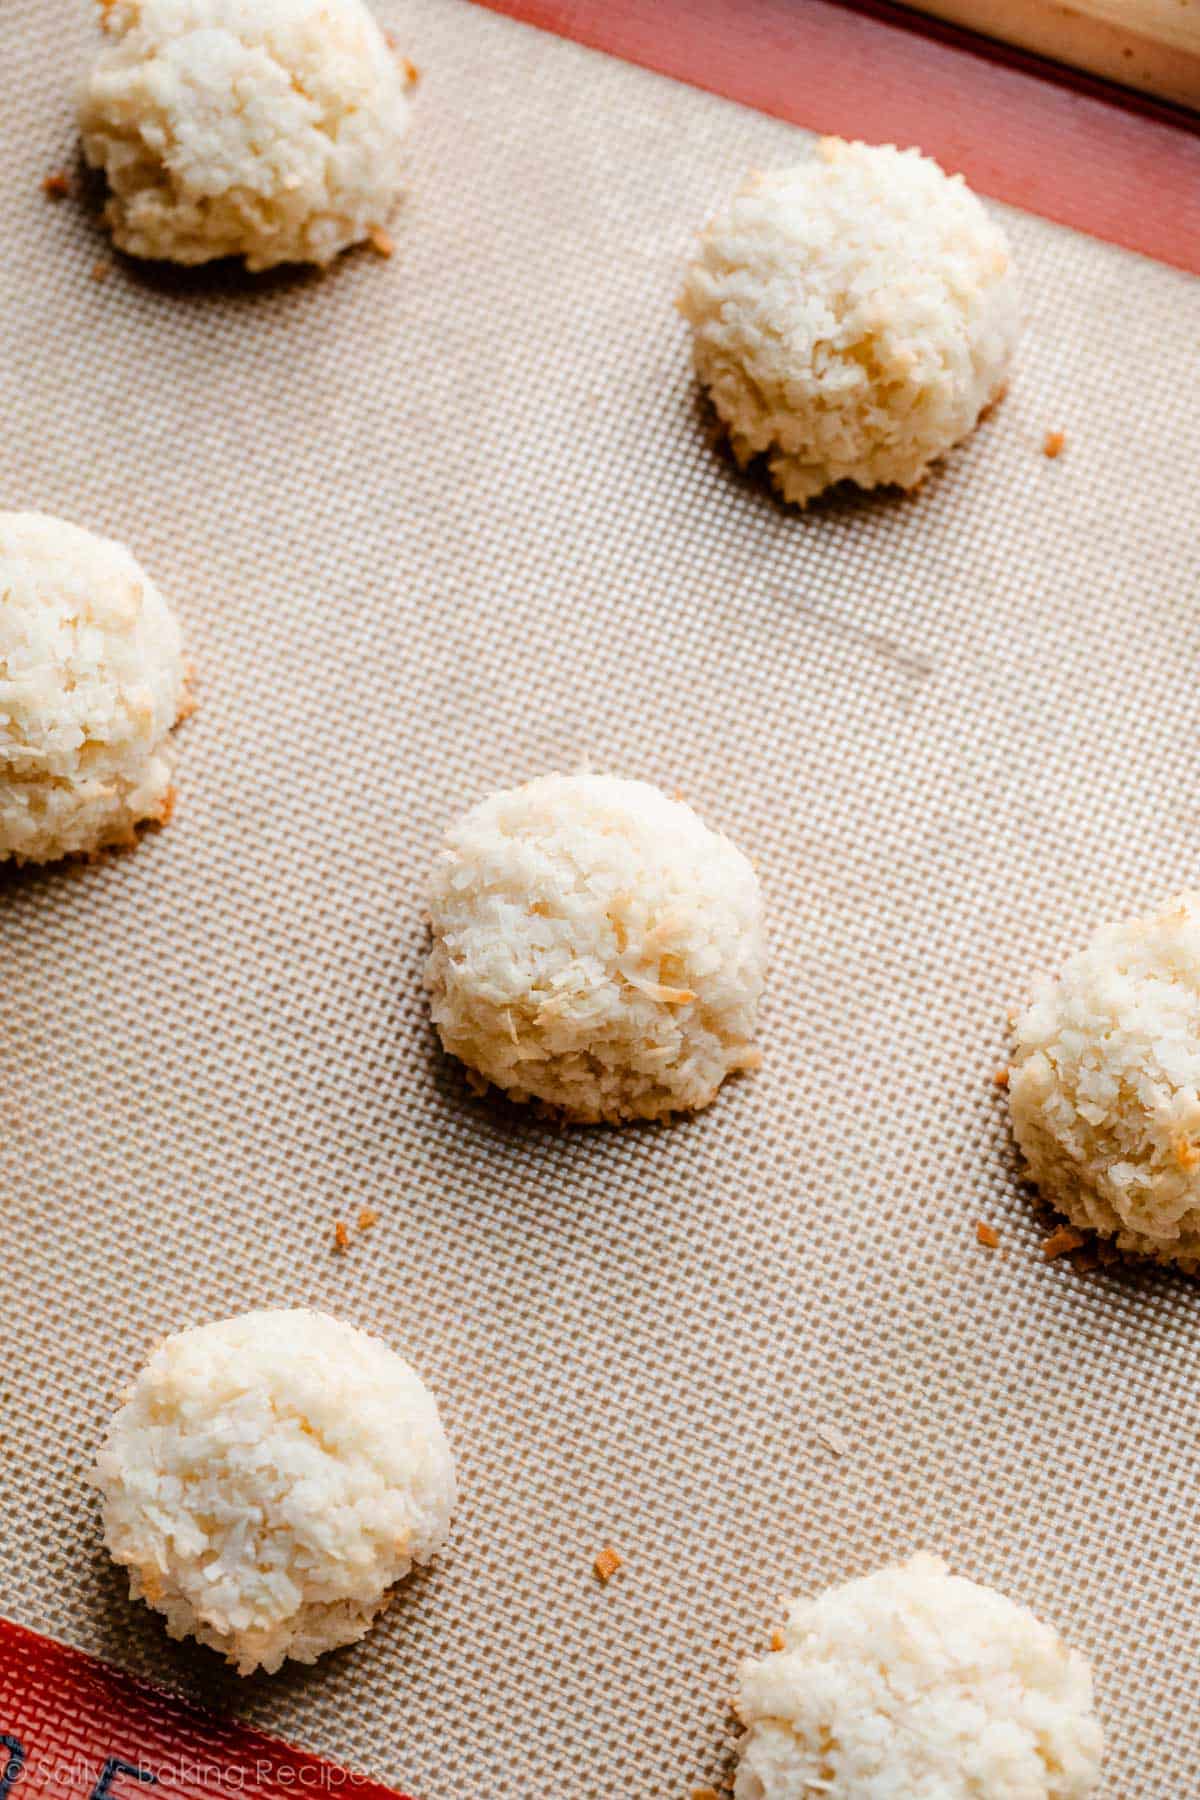 baked coconut macaroons on Silpat-lined baking sheet.